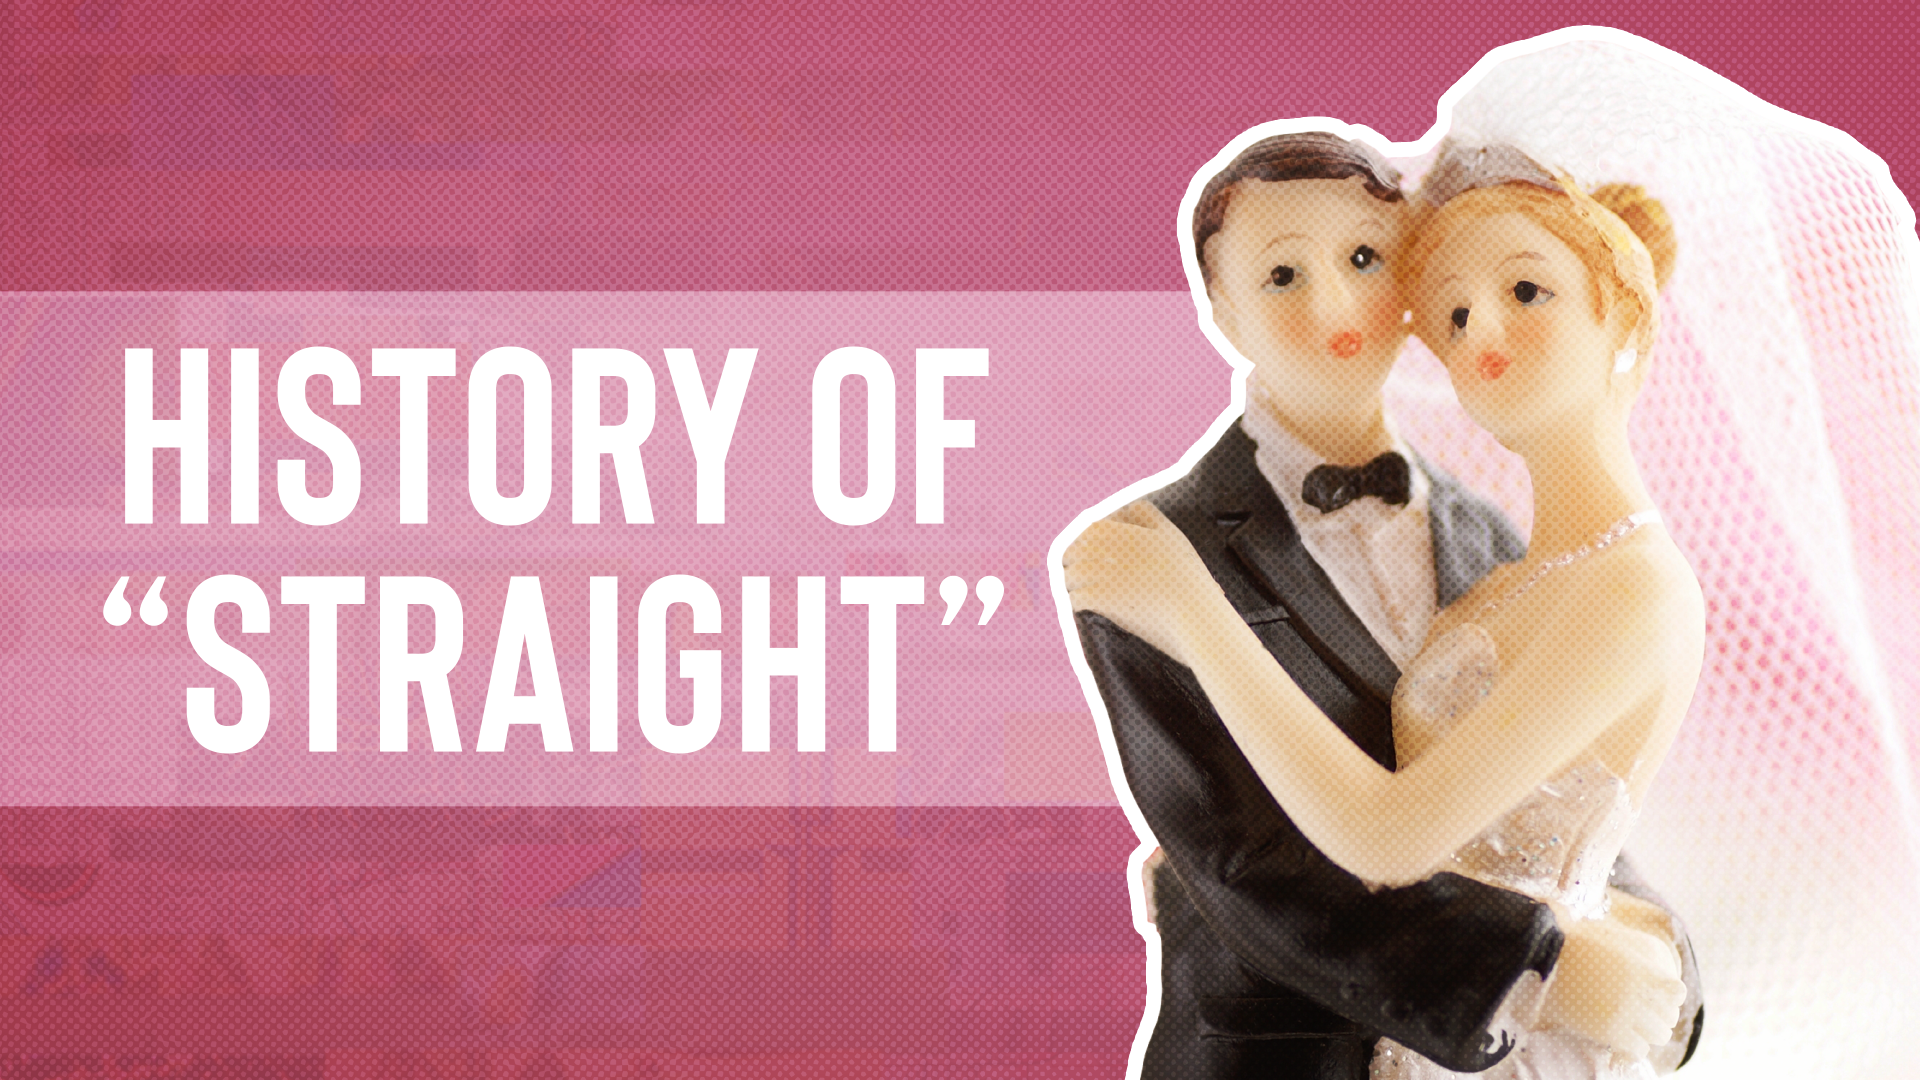 Why Does "Straight" Mean Heterosexual?